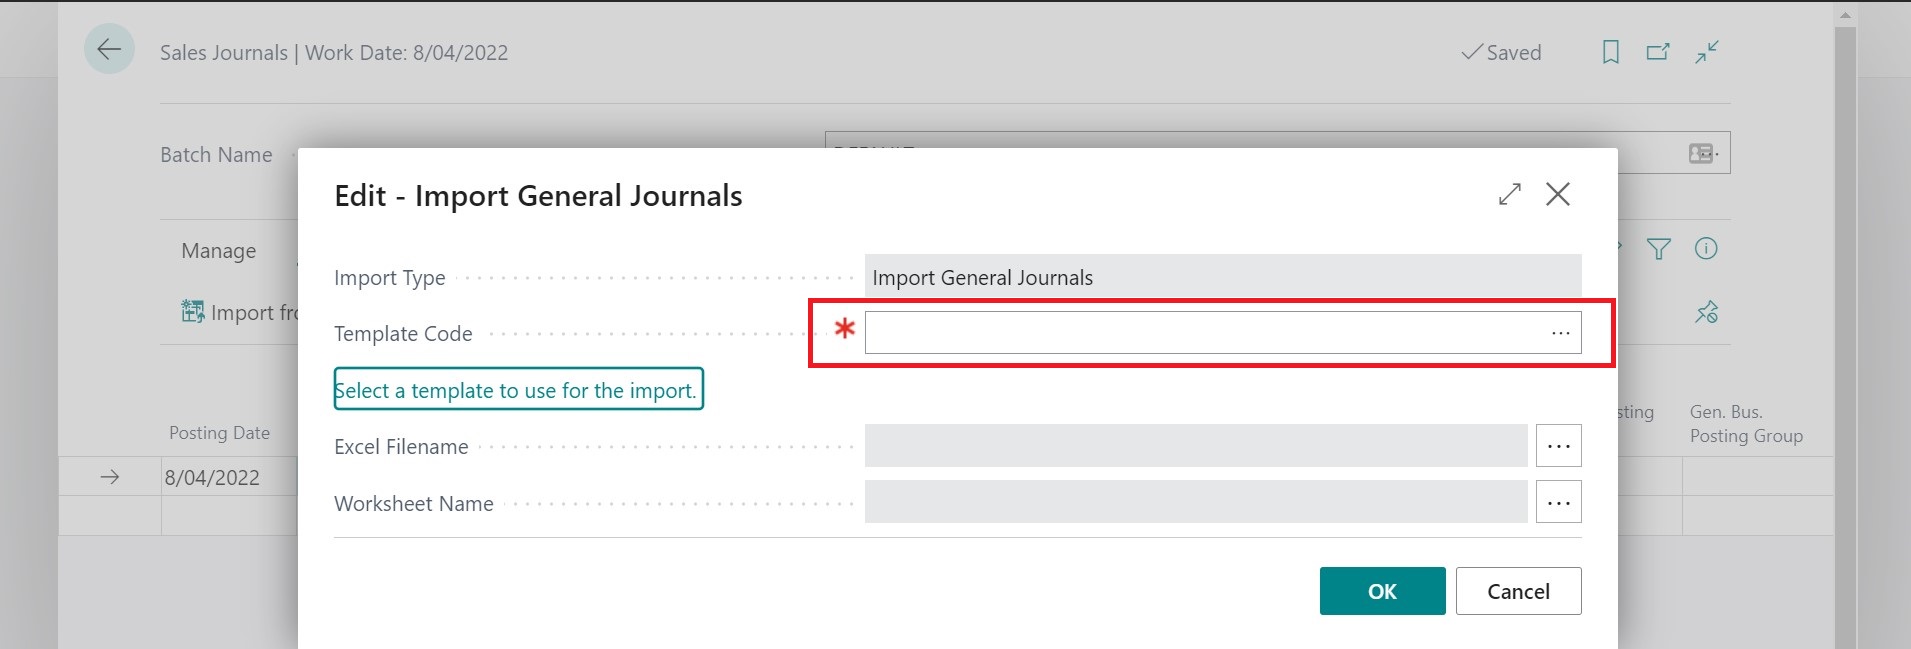 Sales Journal Select Template